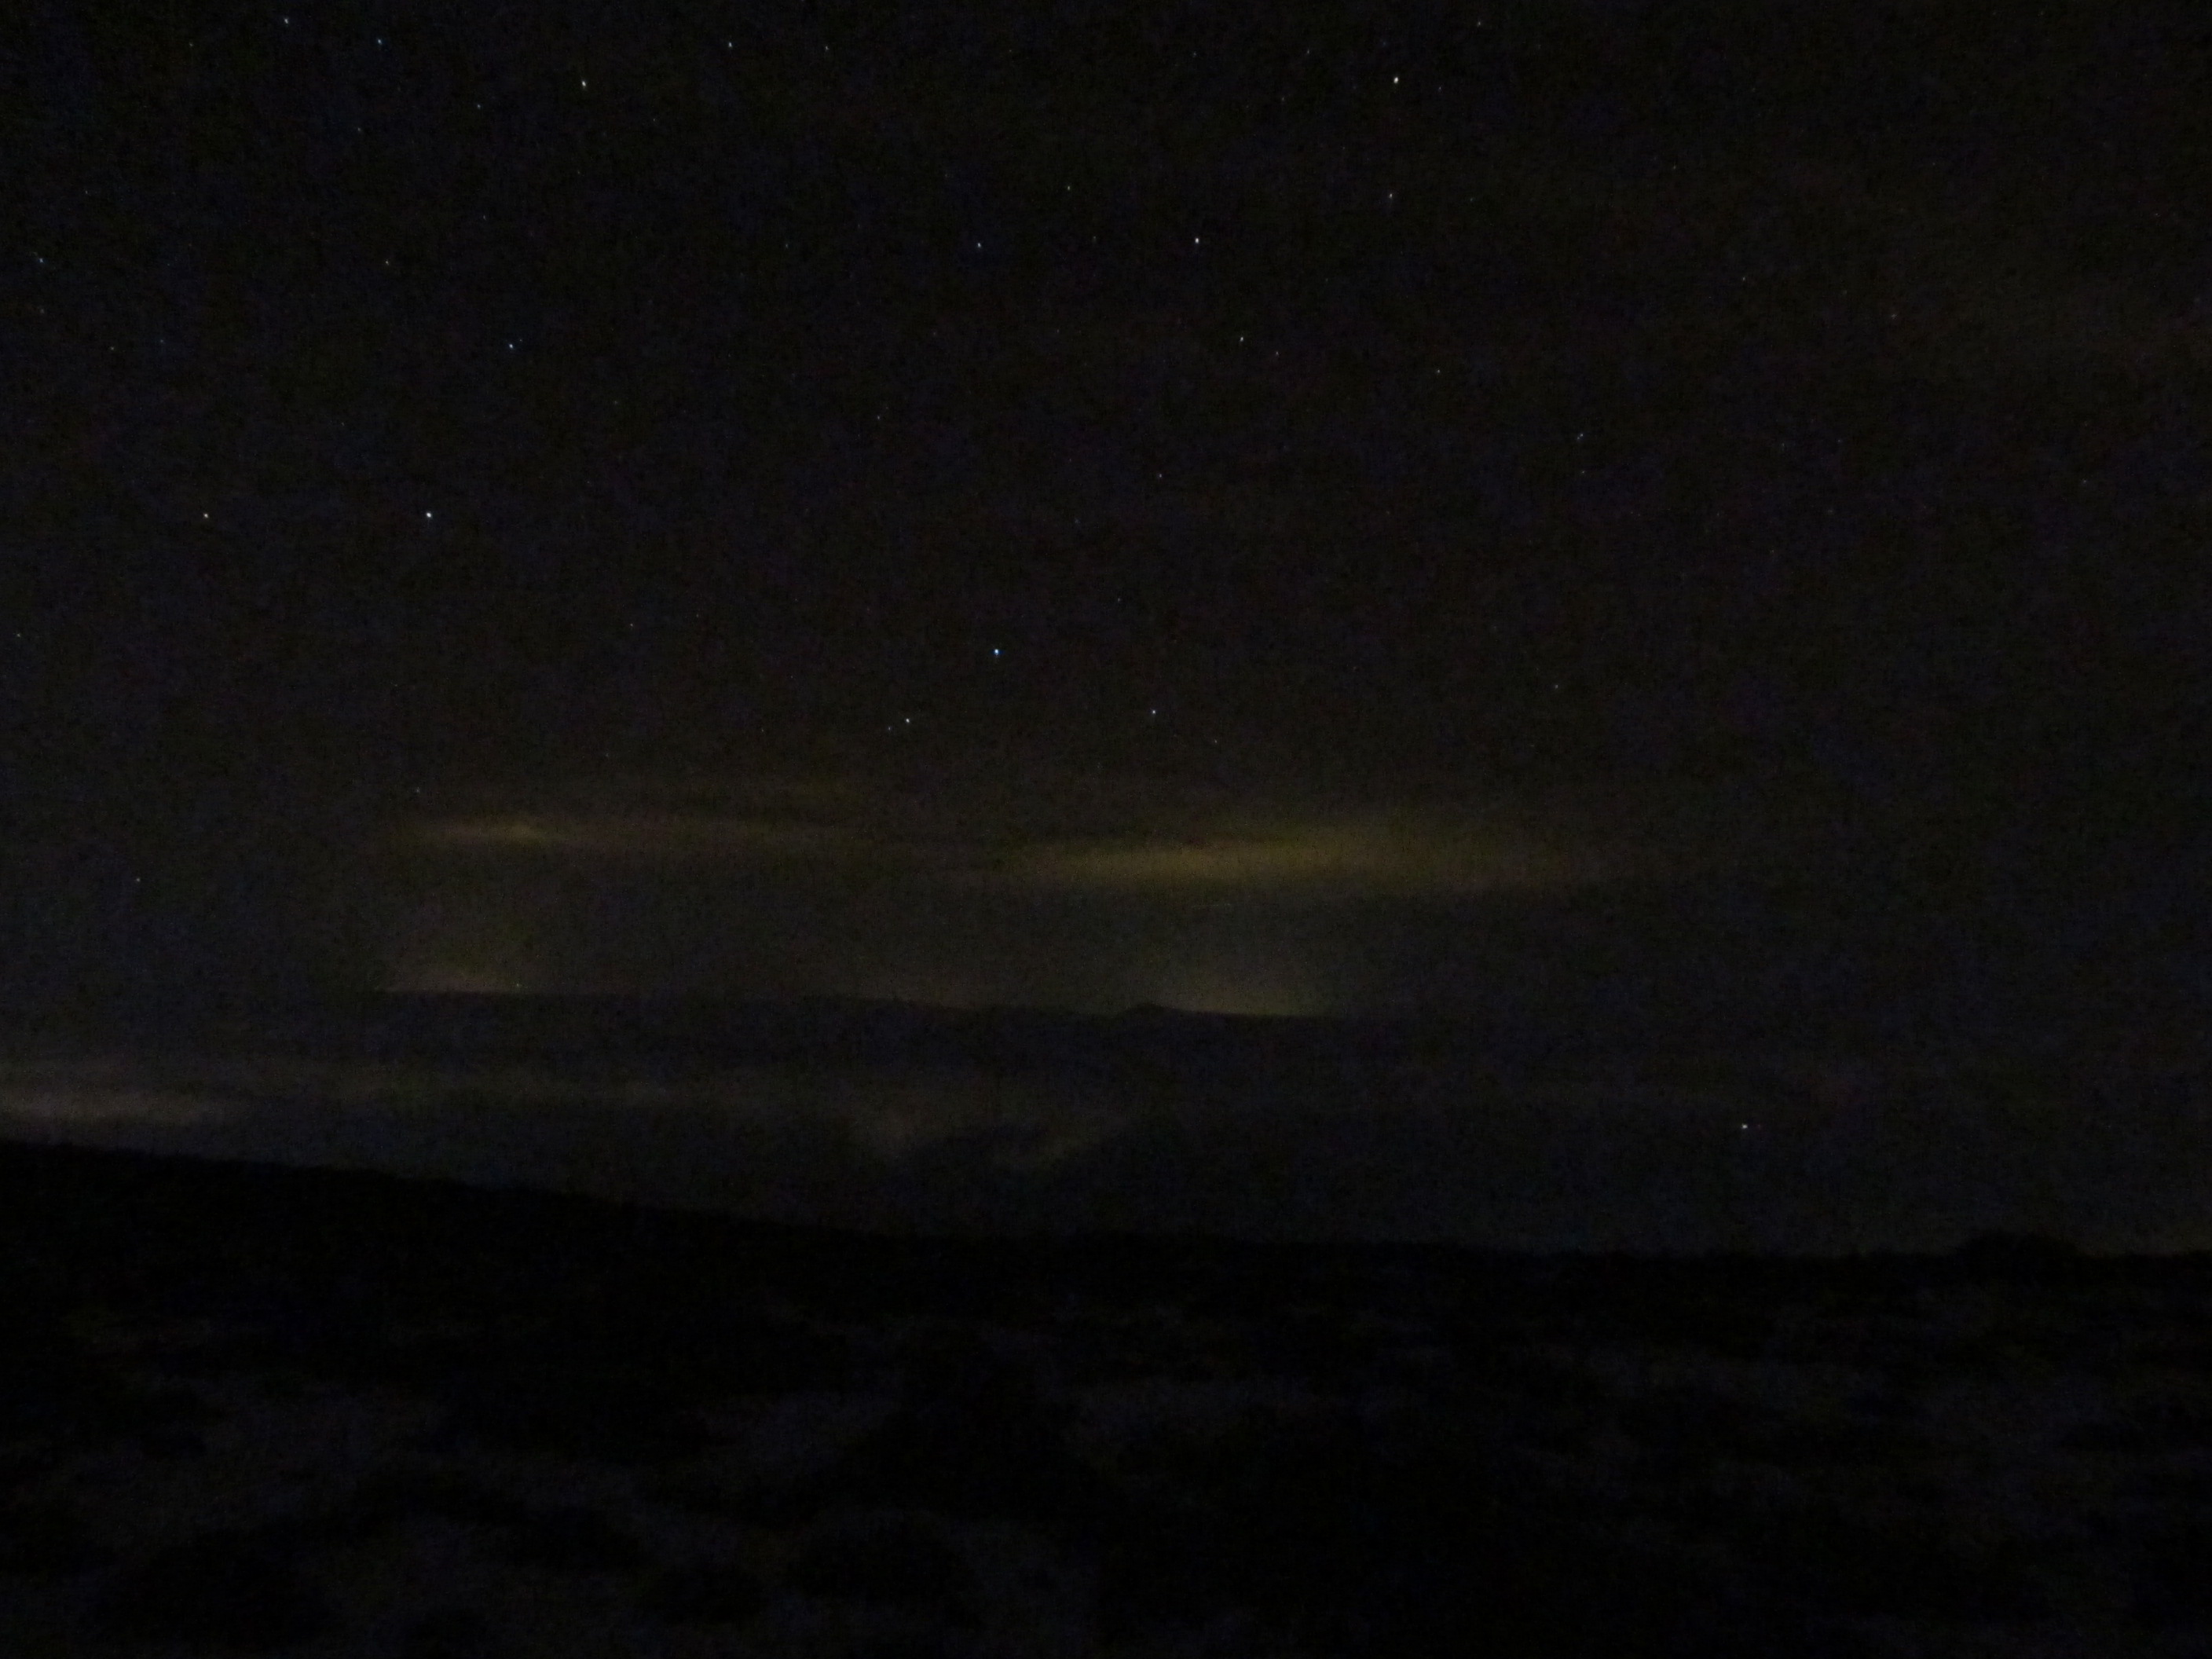 Gran Canaria cloudiness and light pollution seen from Tenerife